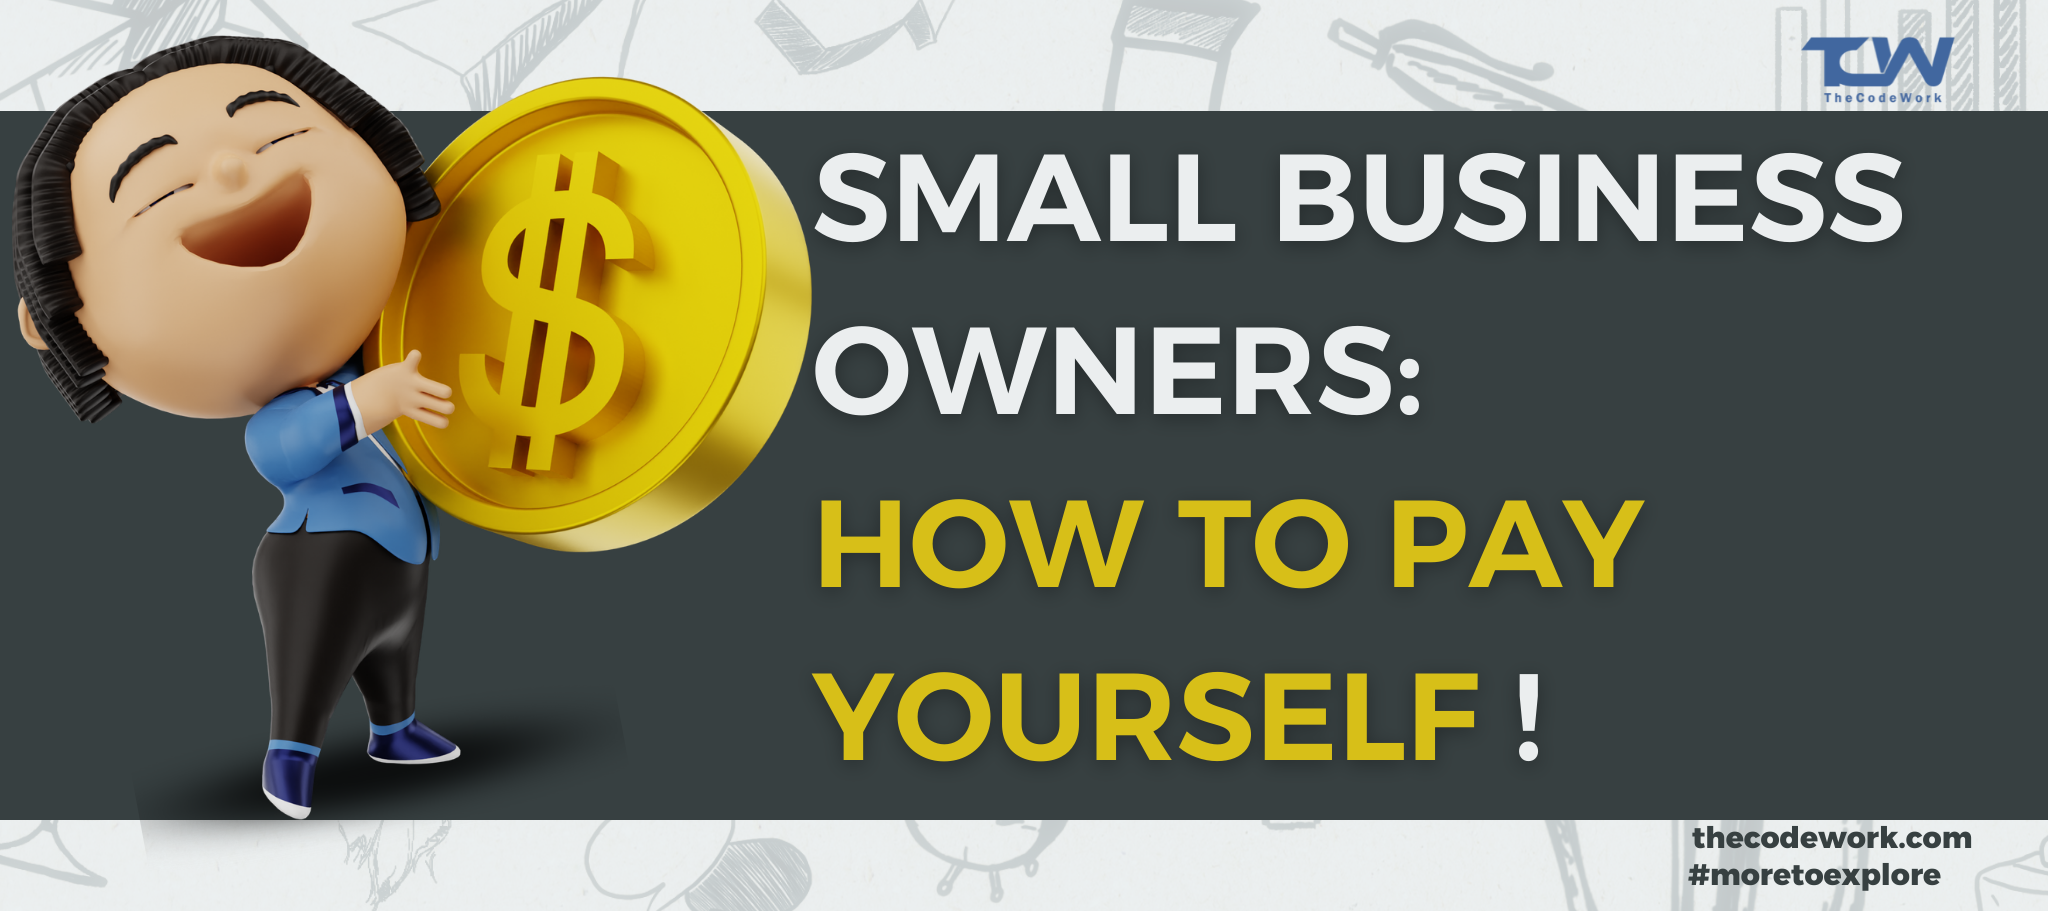 Small Business Owners: How to Pay Yourself  